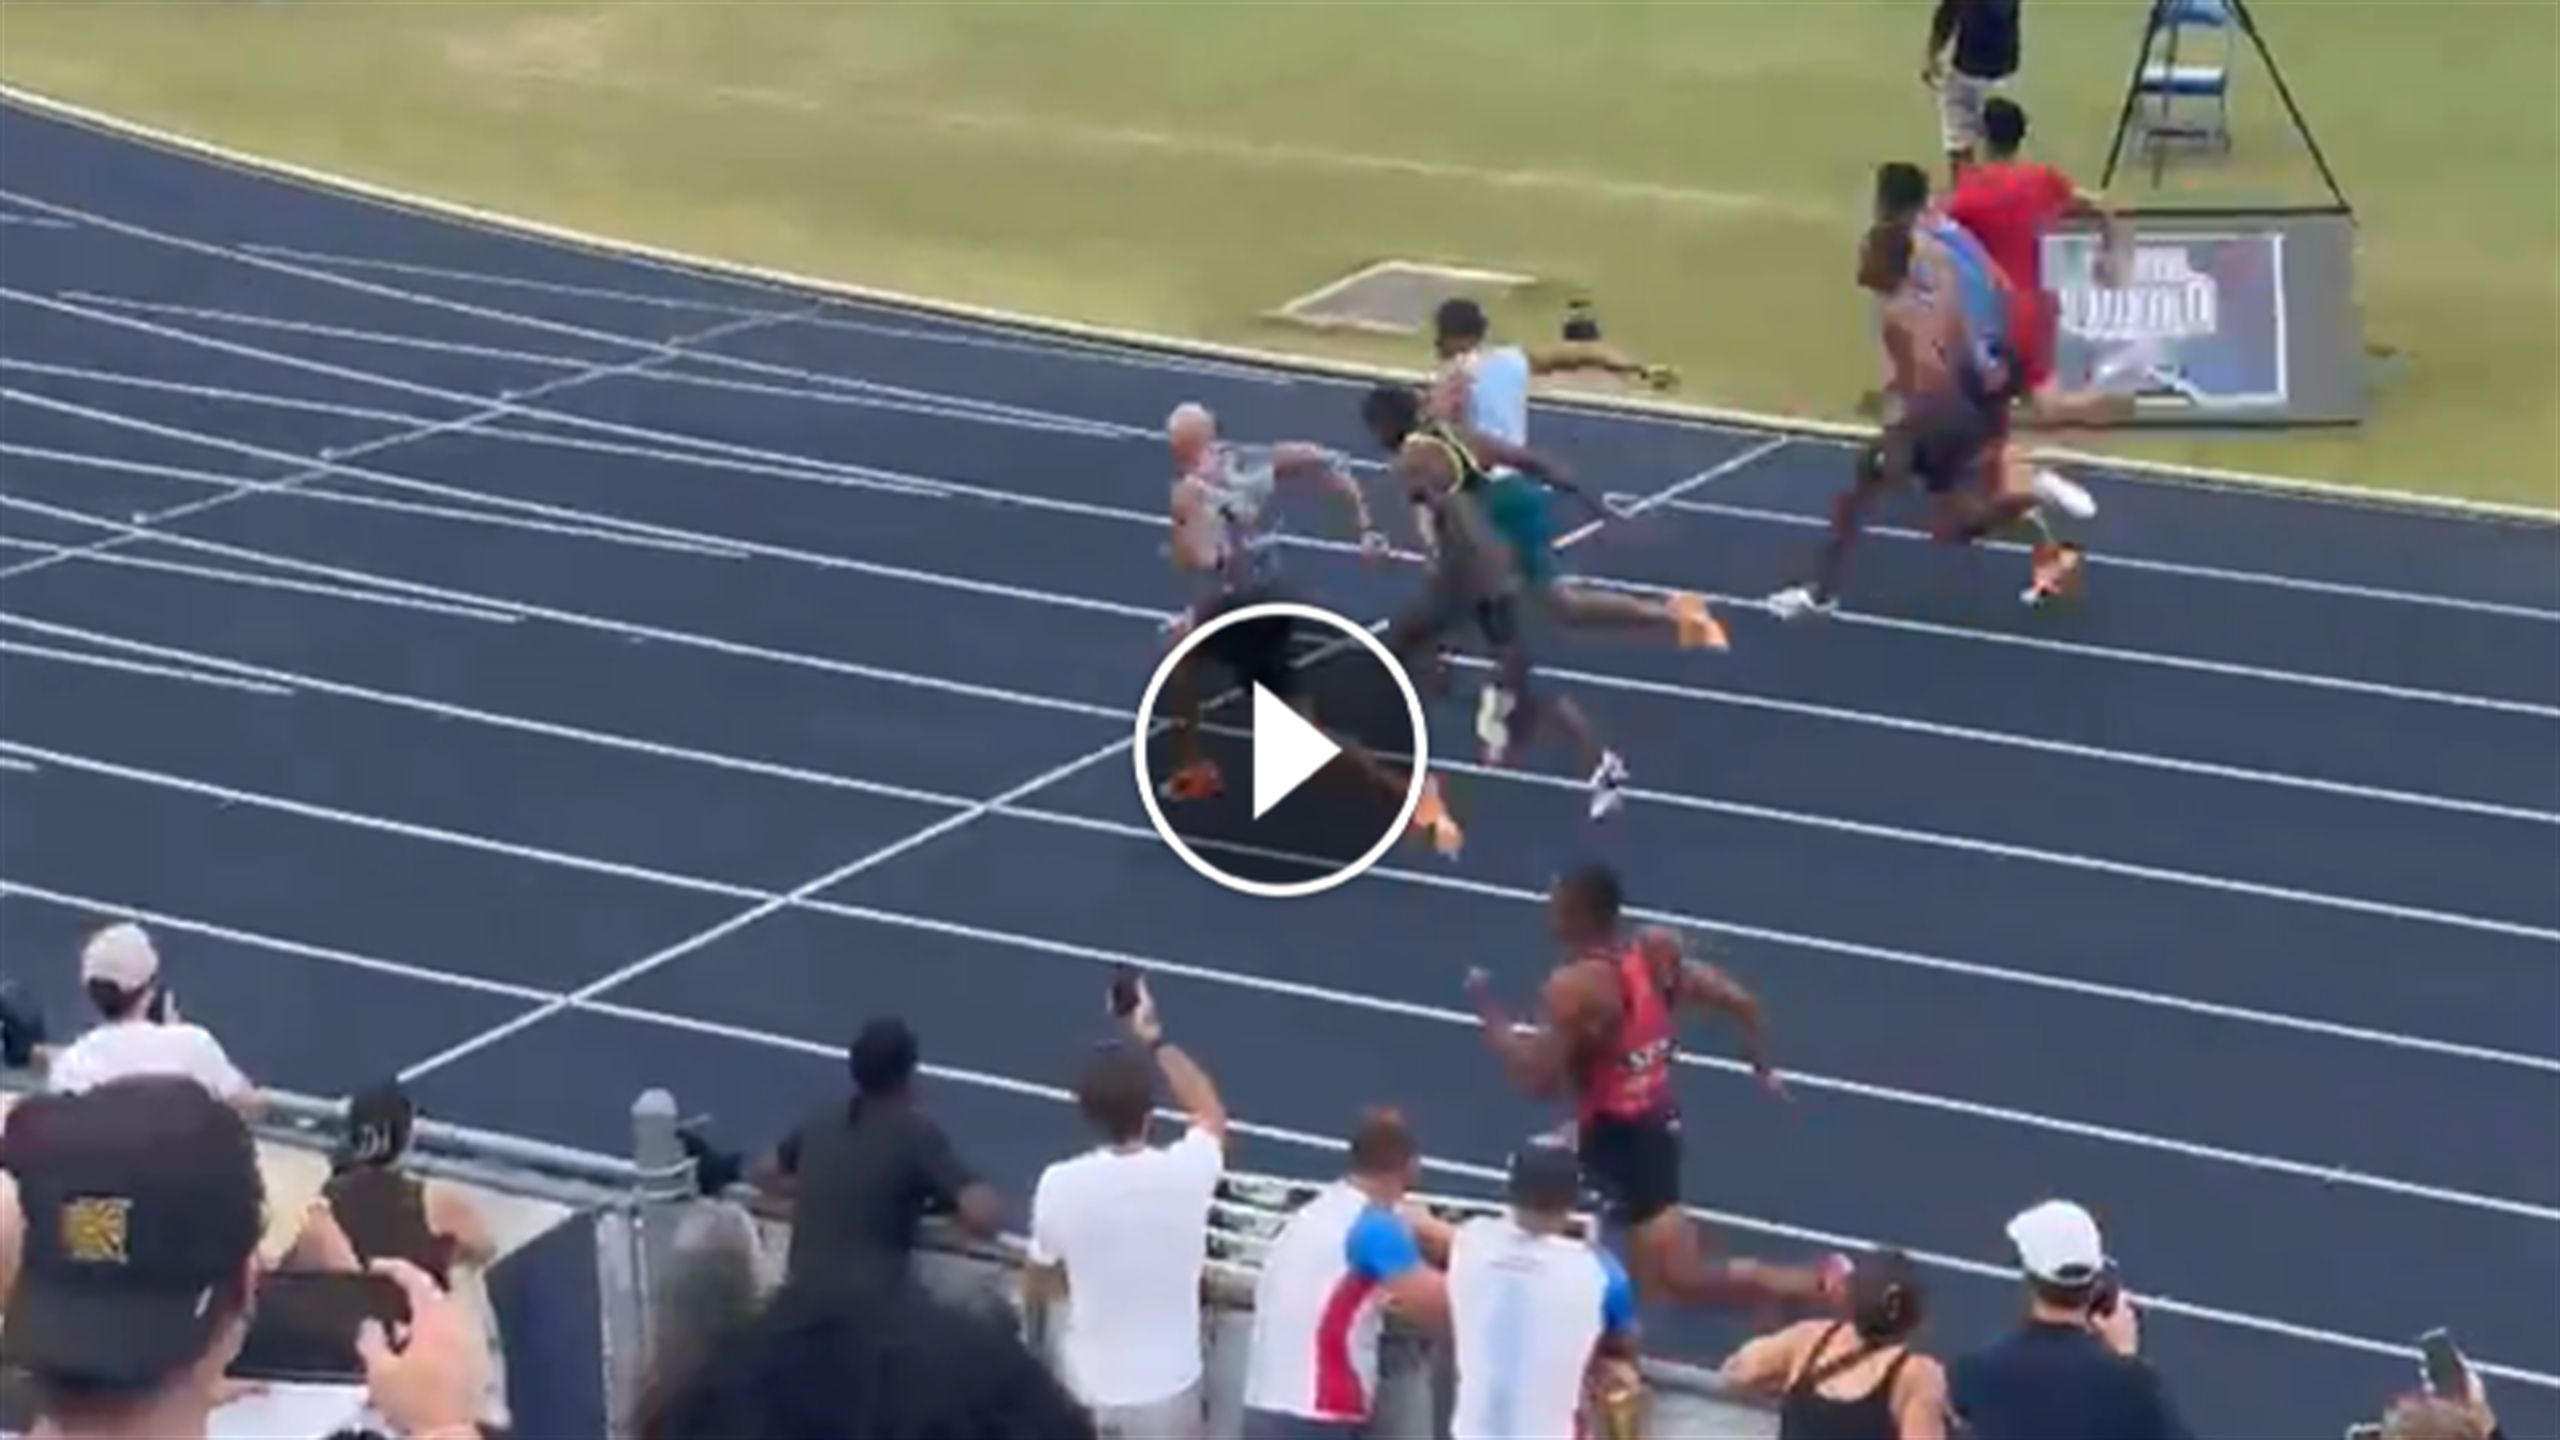 Marcell Jacobs returns to Jacksonville and runs the 100 meters in 10:11: watch the video of the race